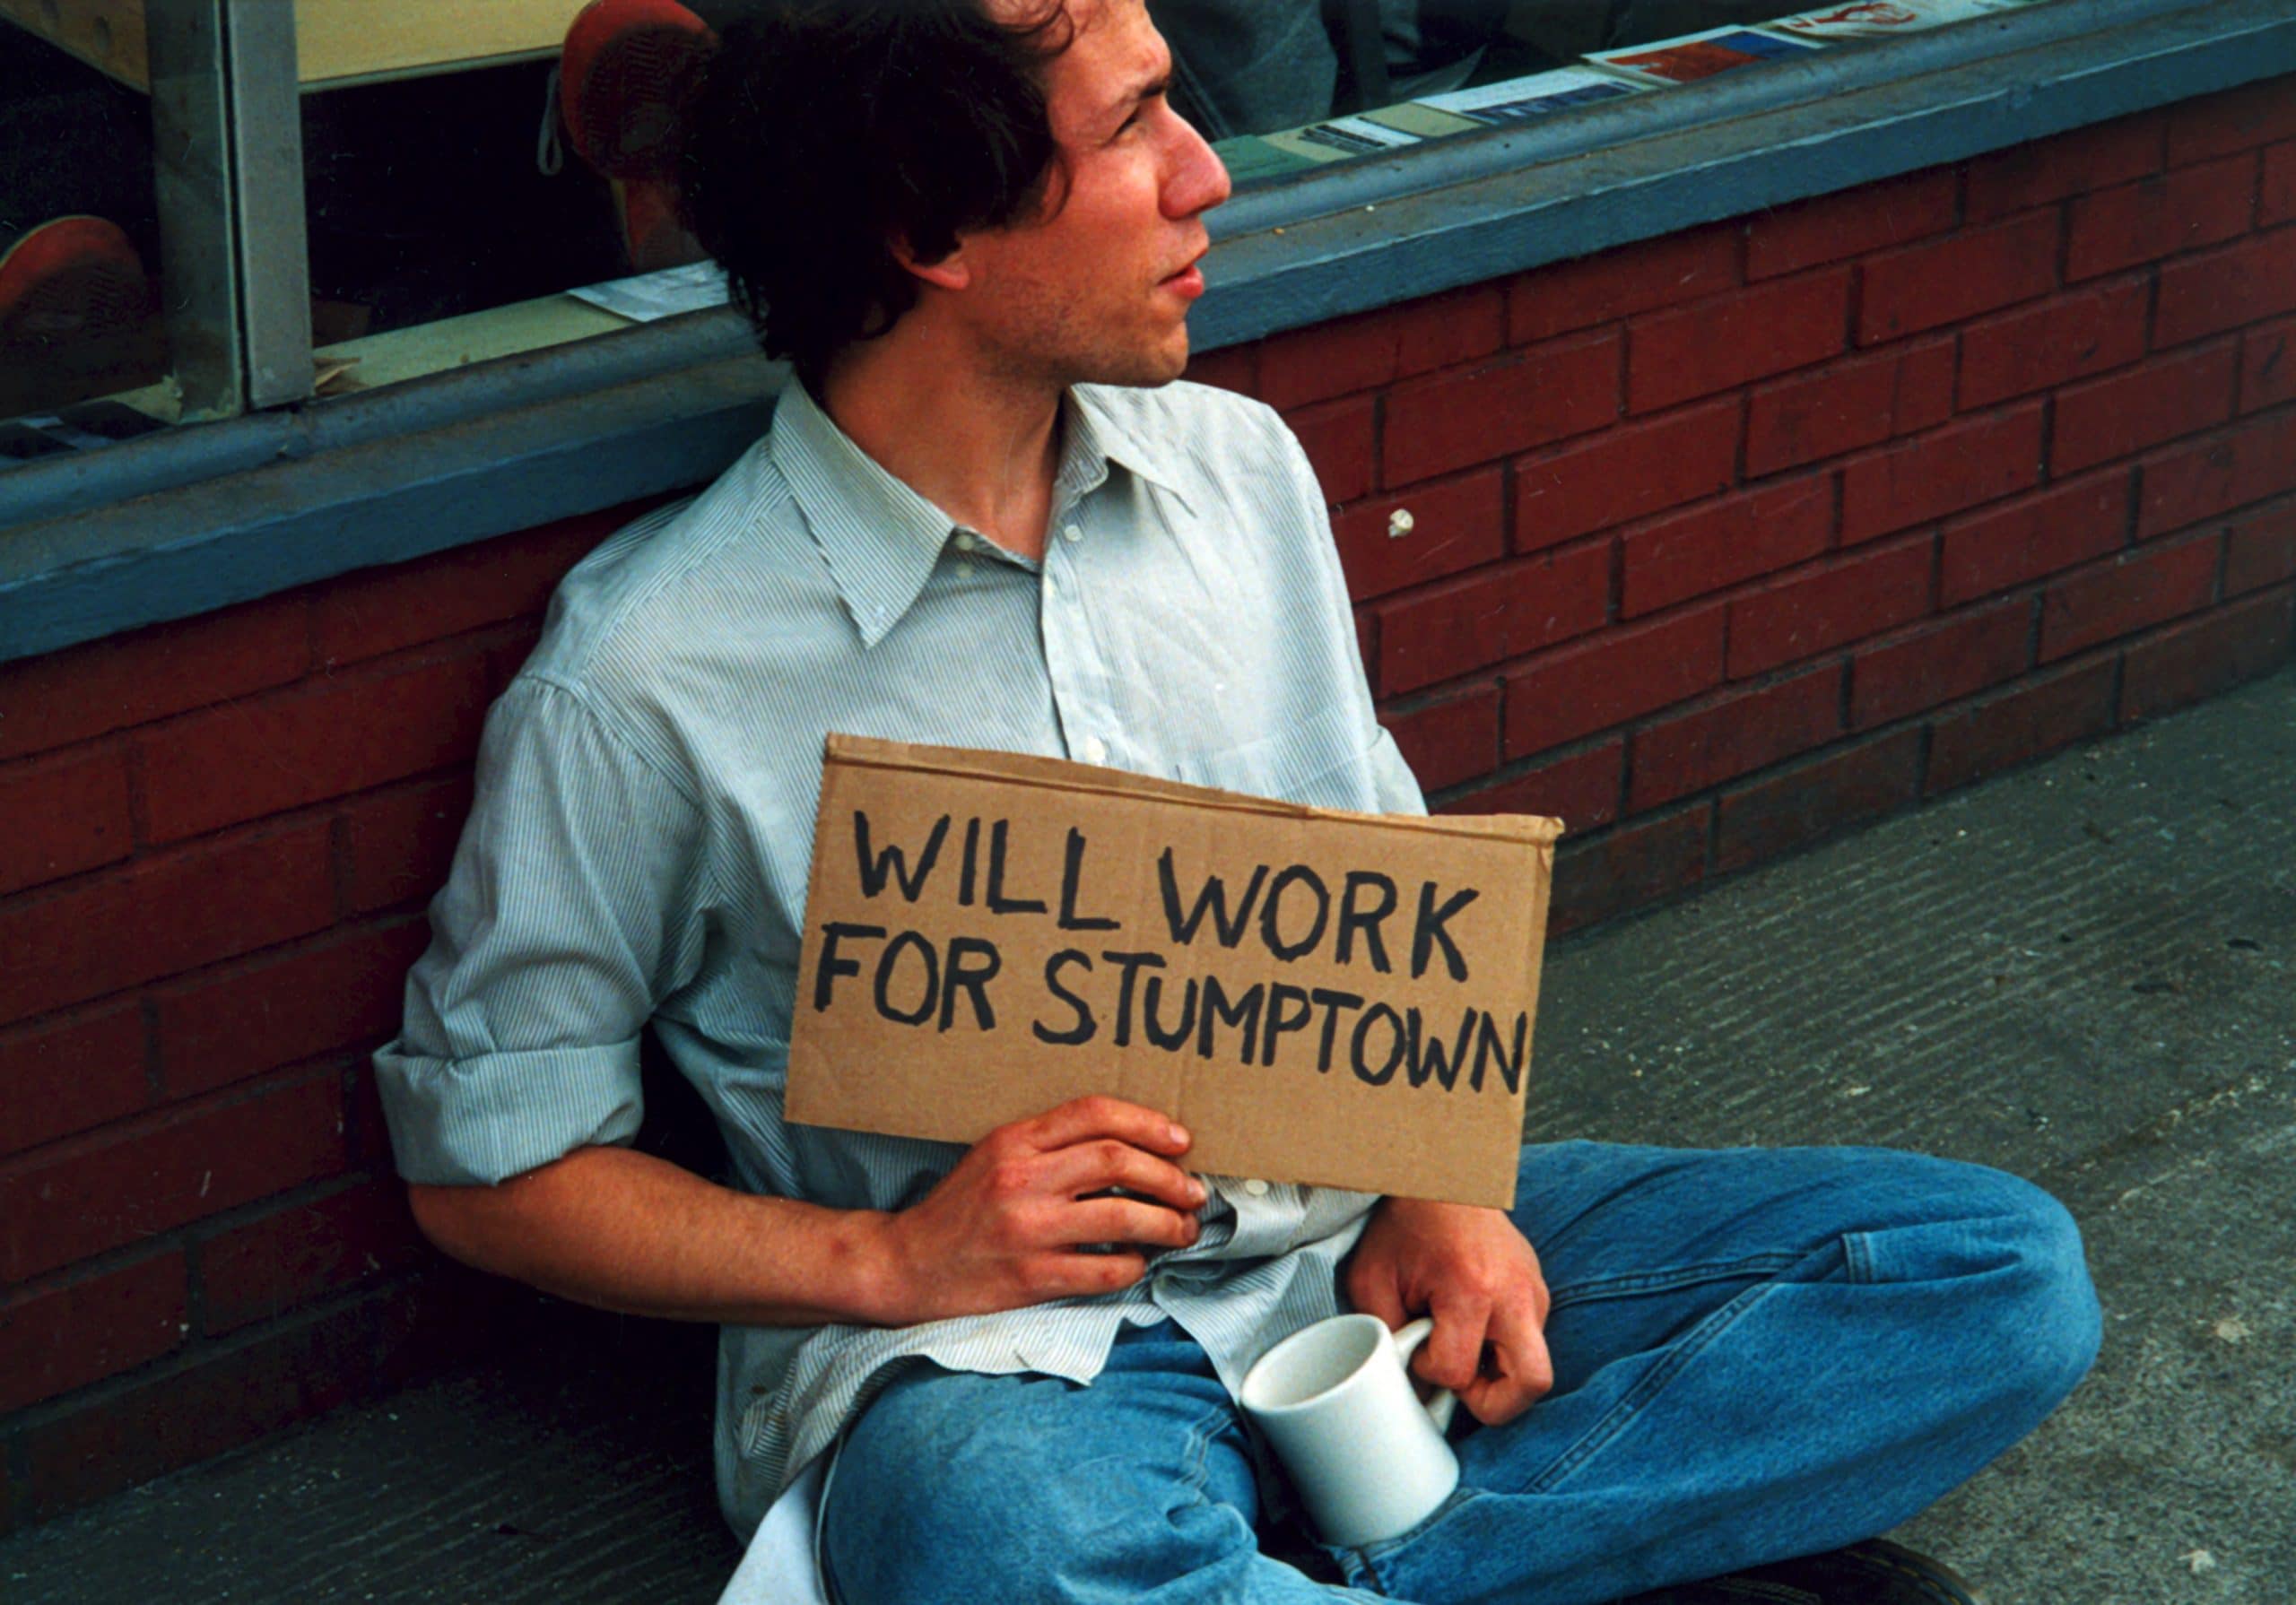 Raymond holding a signs that says "WILL WORK FOR STUMPTOWN" - part of an early art project.